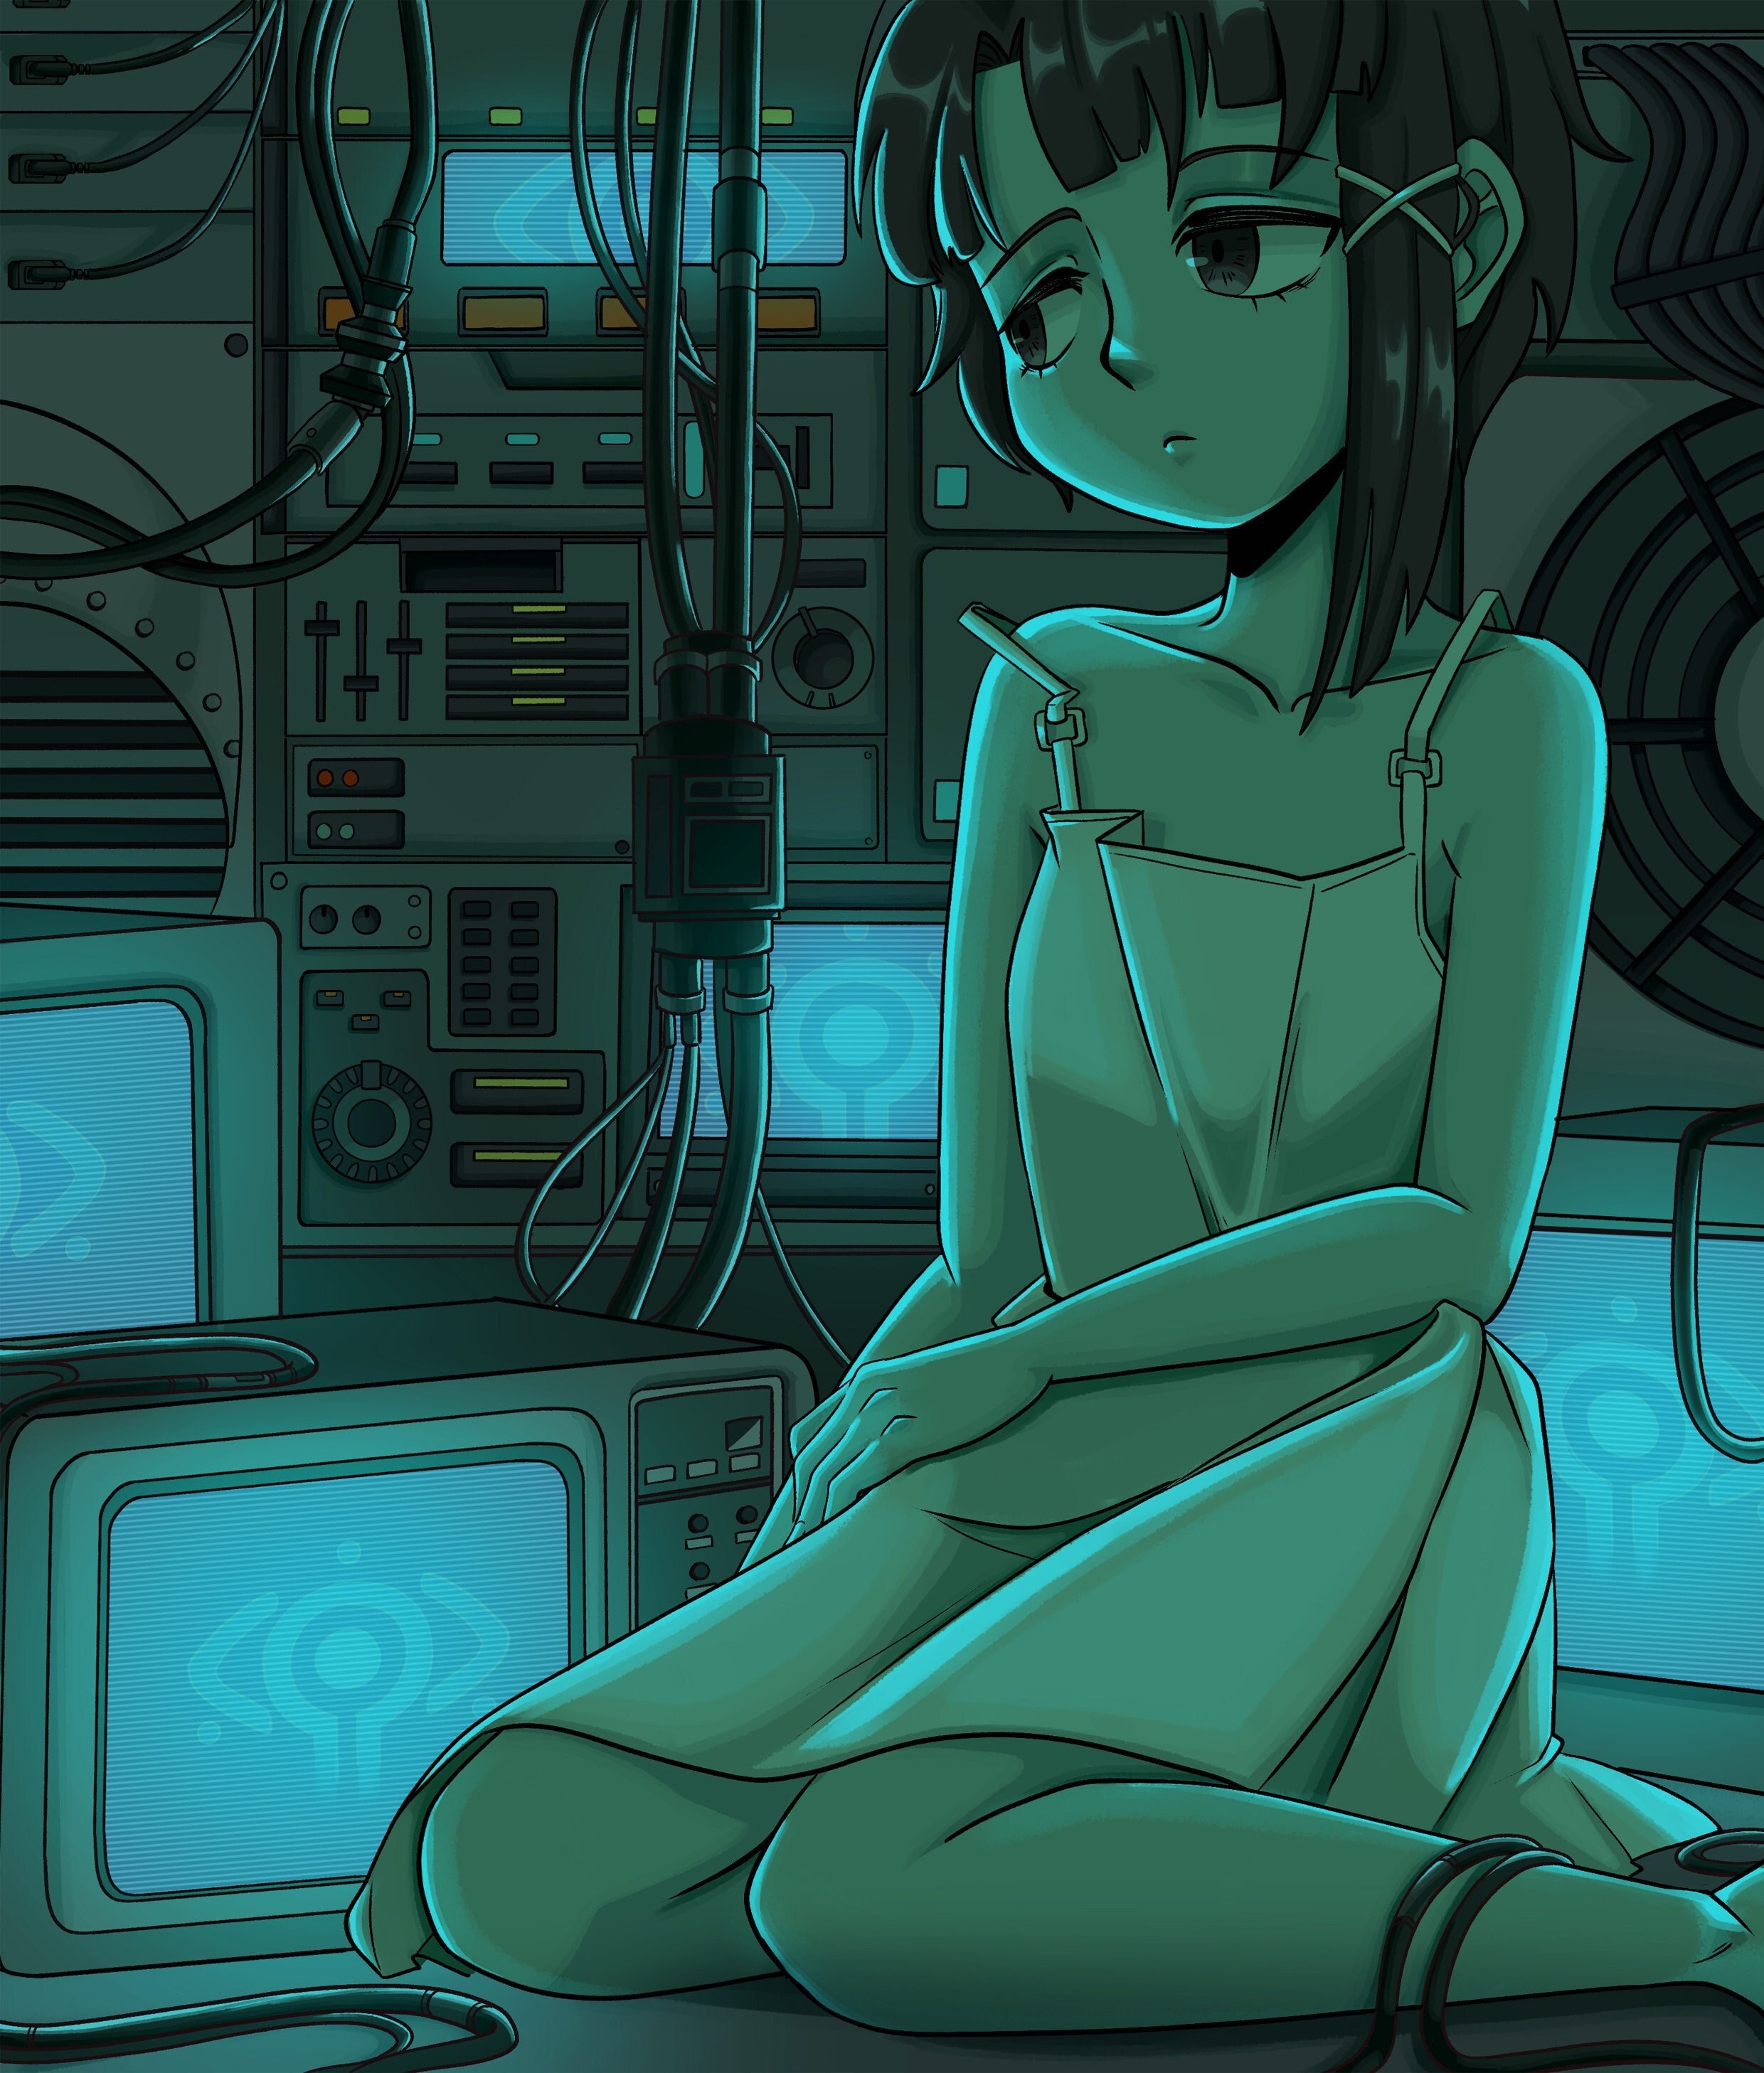 An Anime That Predicted AI Revolution ? Serial Experiments Lain Philosophy  - YouTube